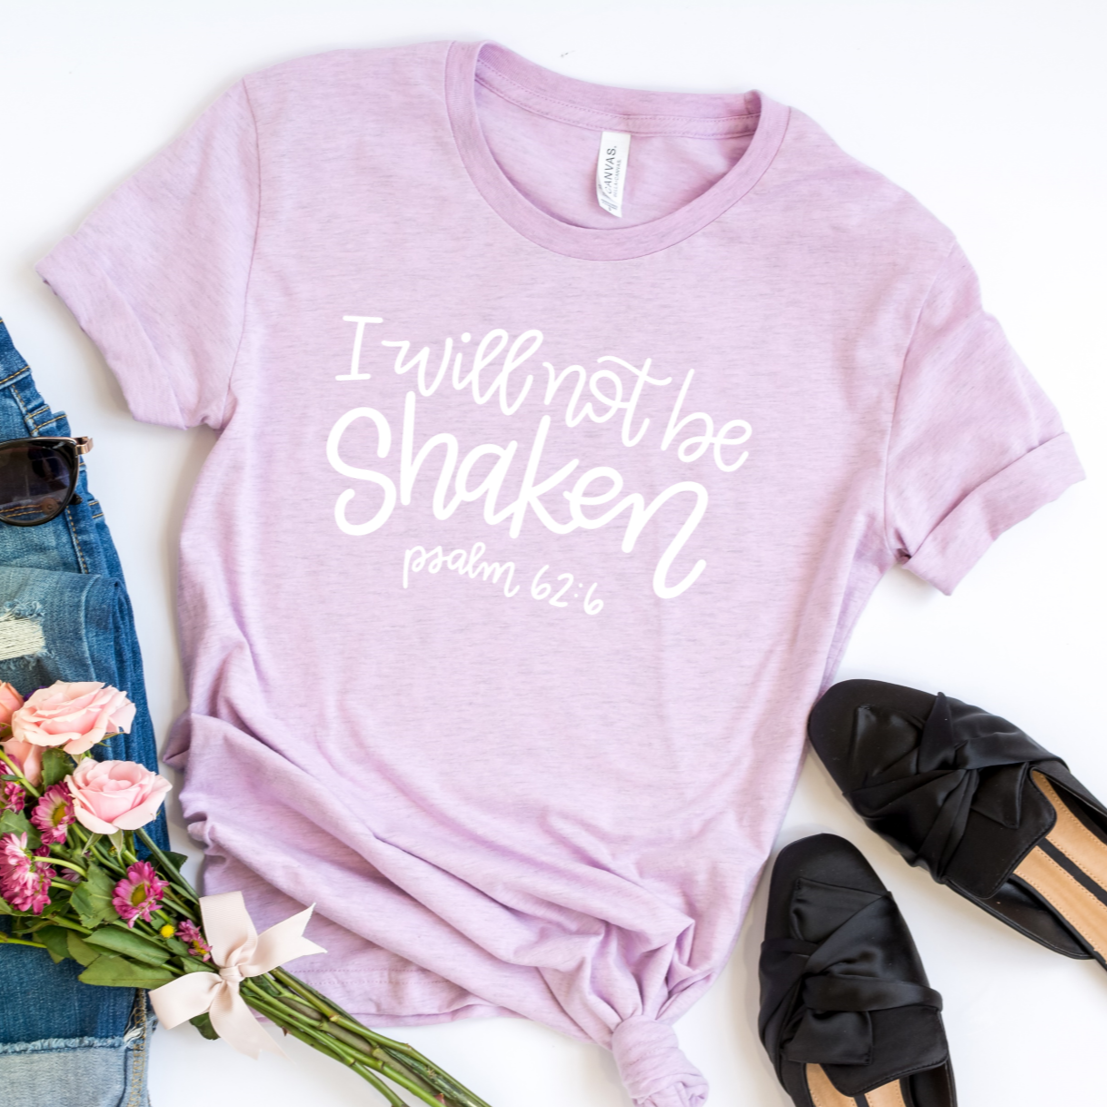 I will not be shaken Psalm 62:6 in white on a heather lilac bella canvas 3001cvc t-shirt.